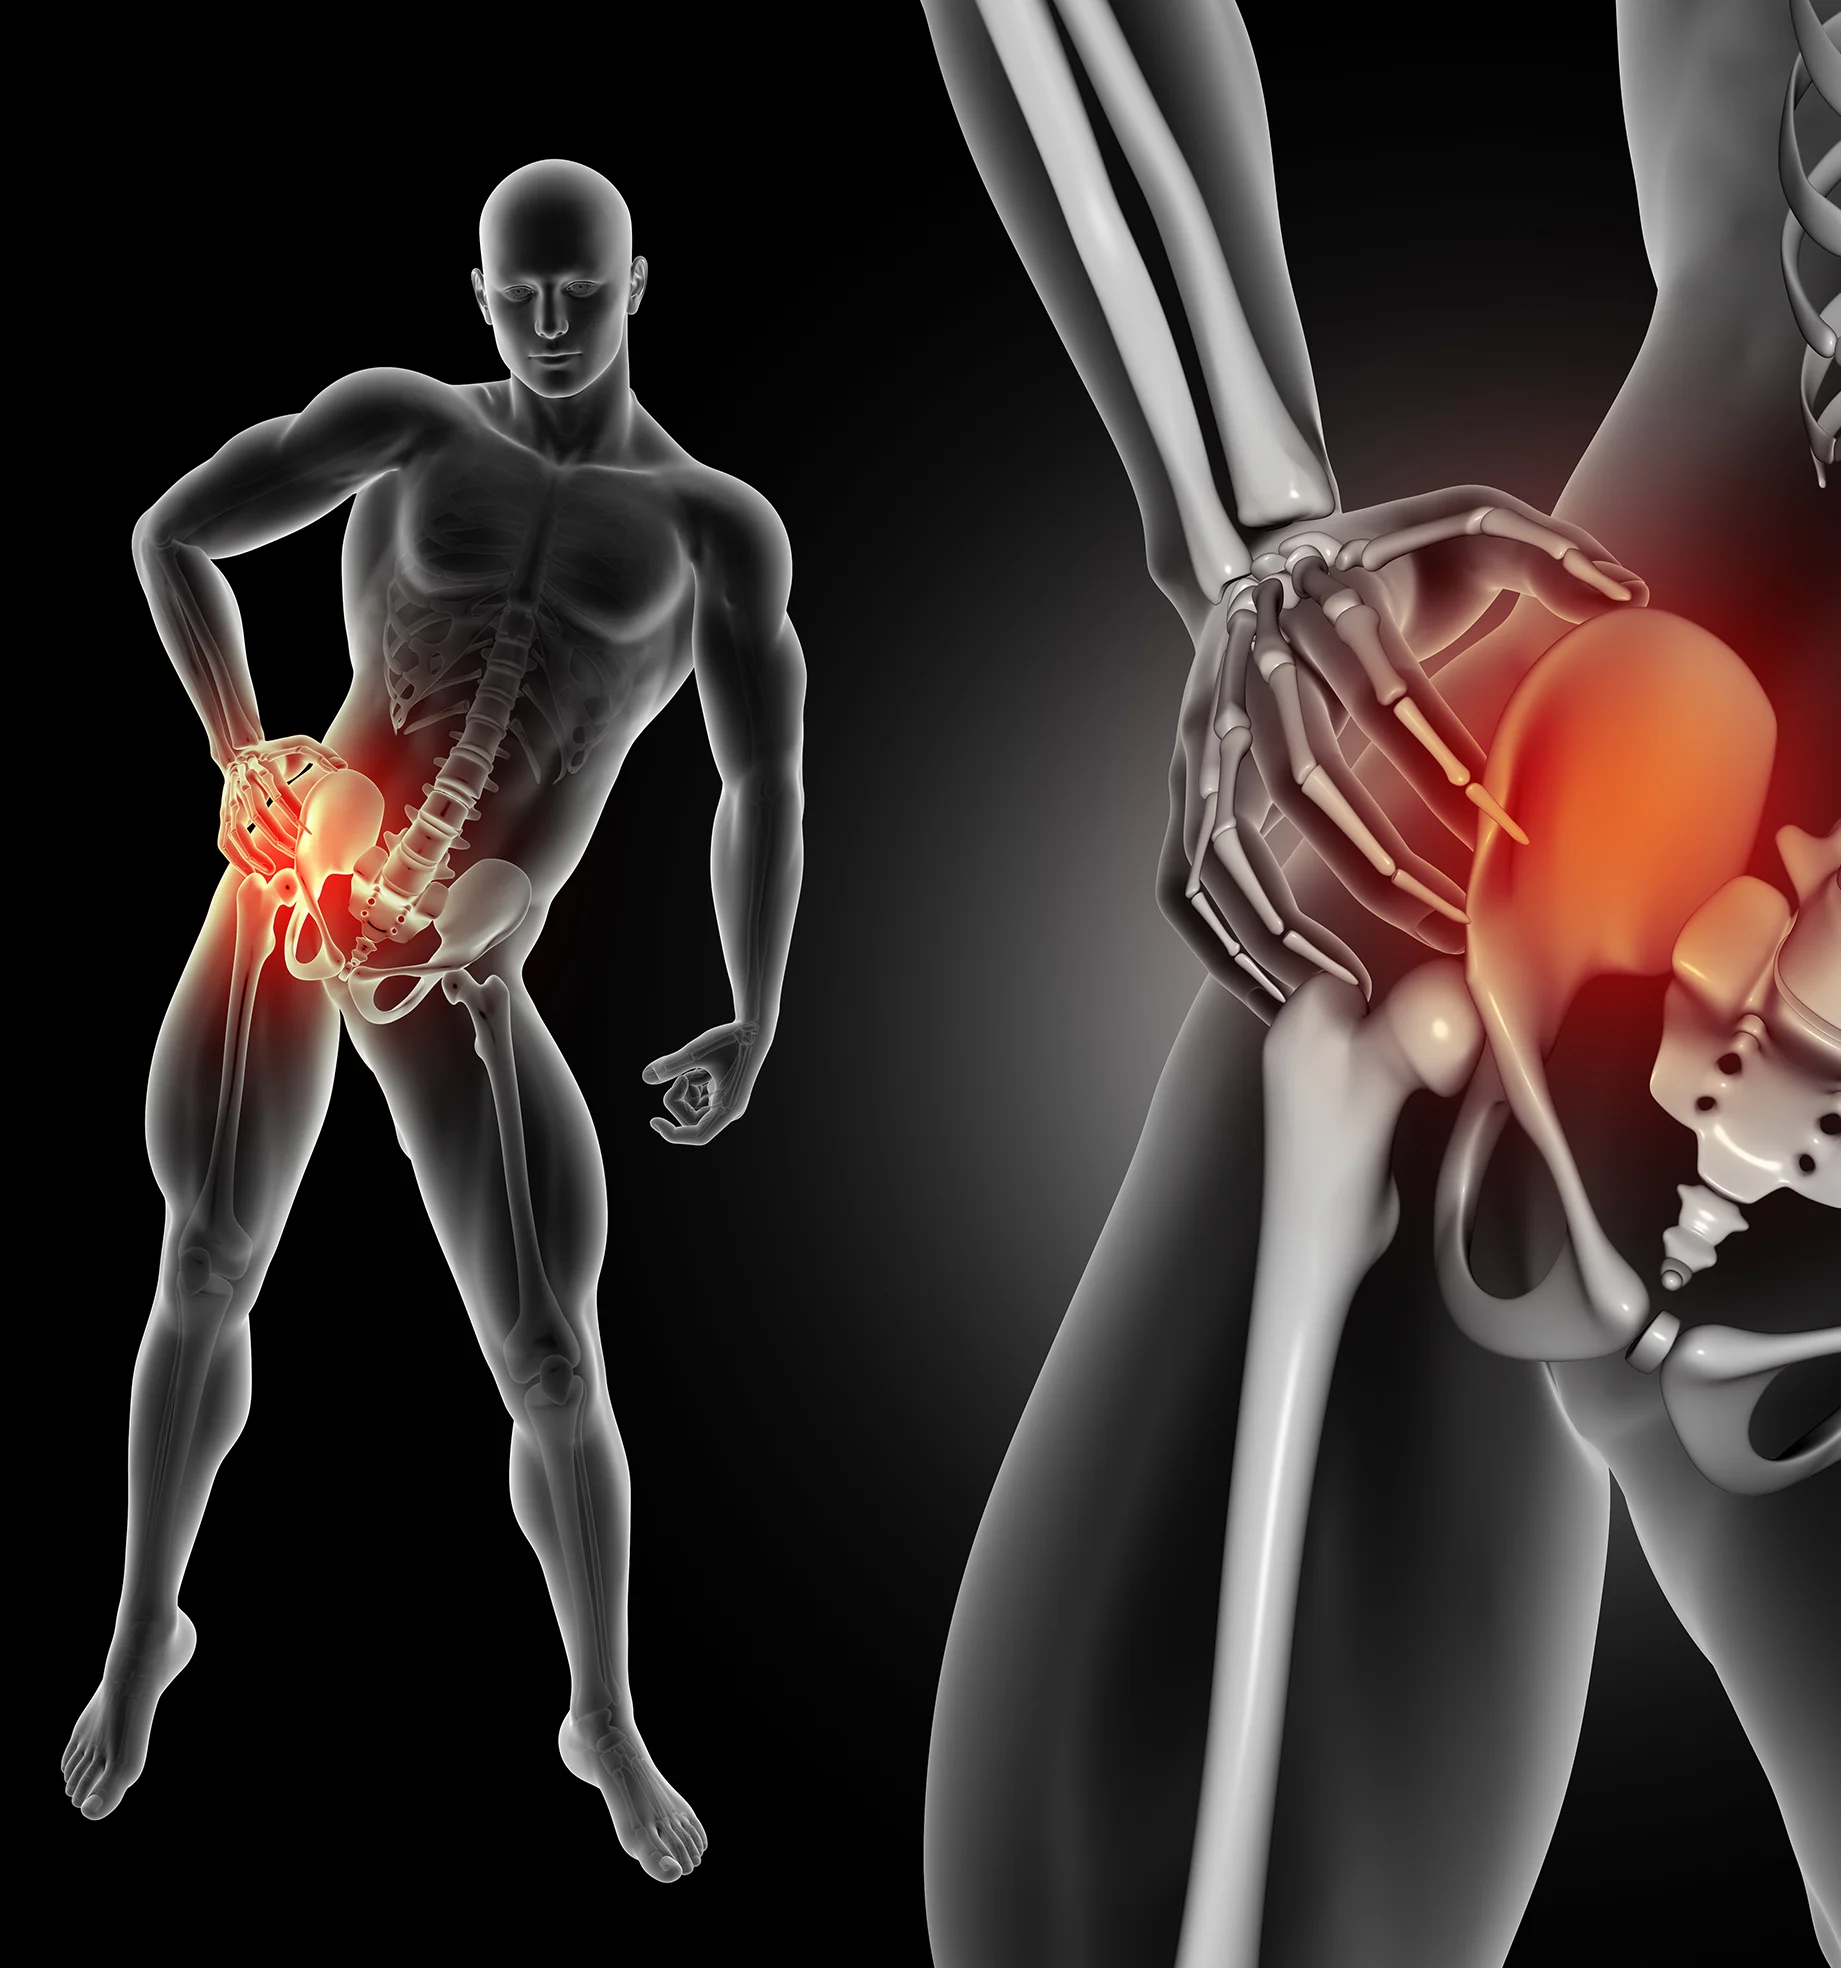 Best Treatment for Knee & Hip Replacement at Gangasheel Hospital - Bareilly